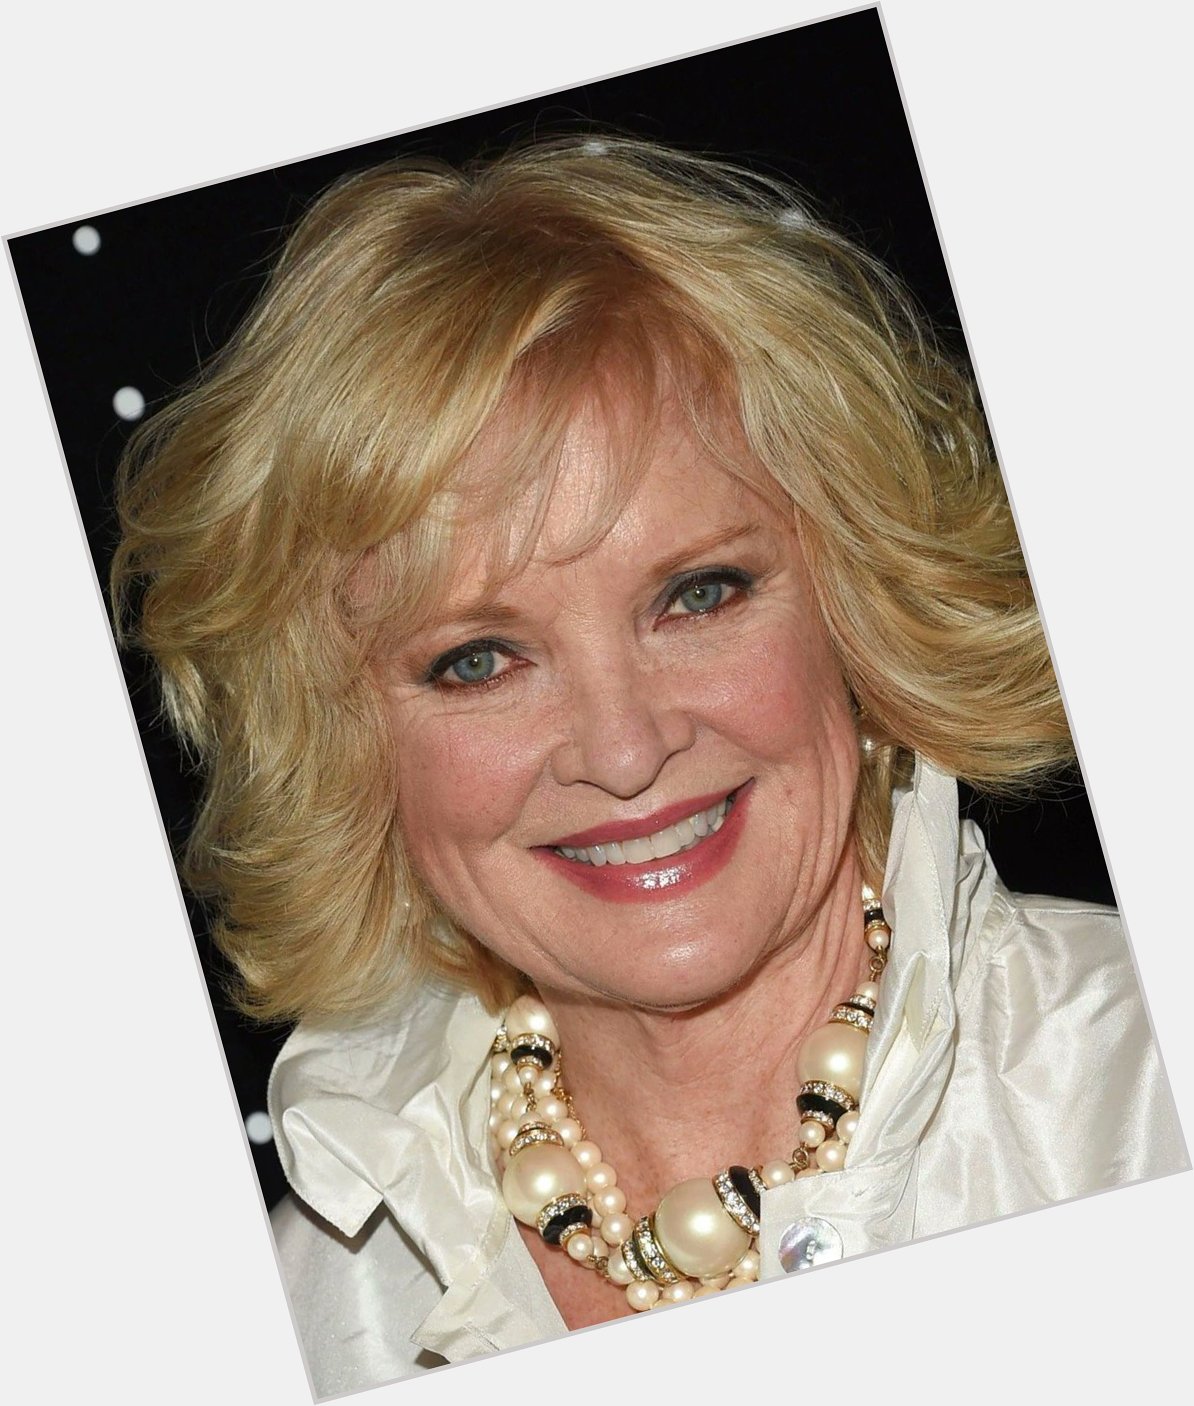 Happy Birthday to actress and singer Christine Ebersole born on February 21, 1953 